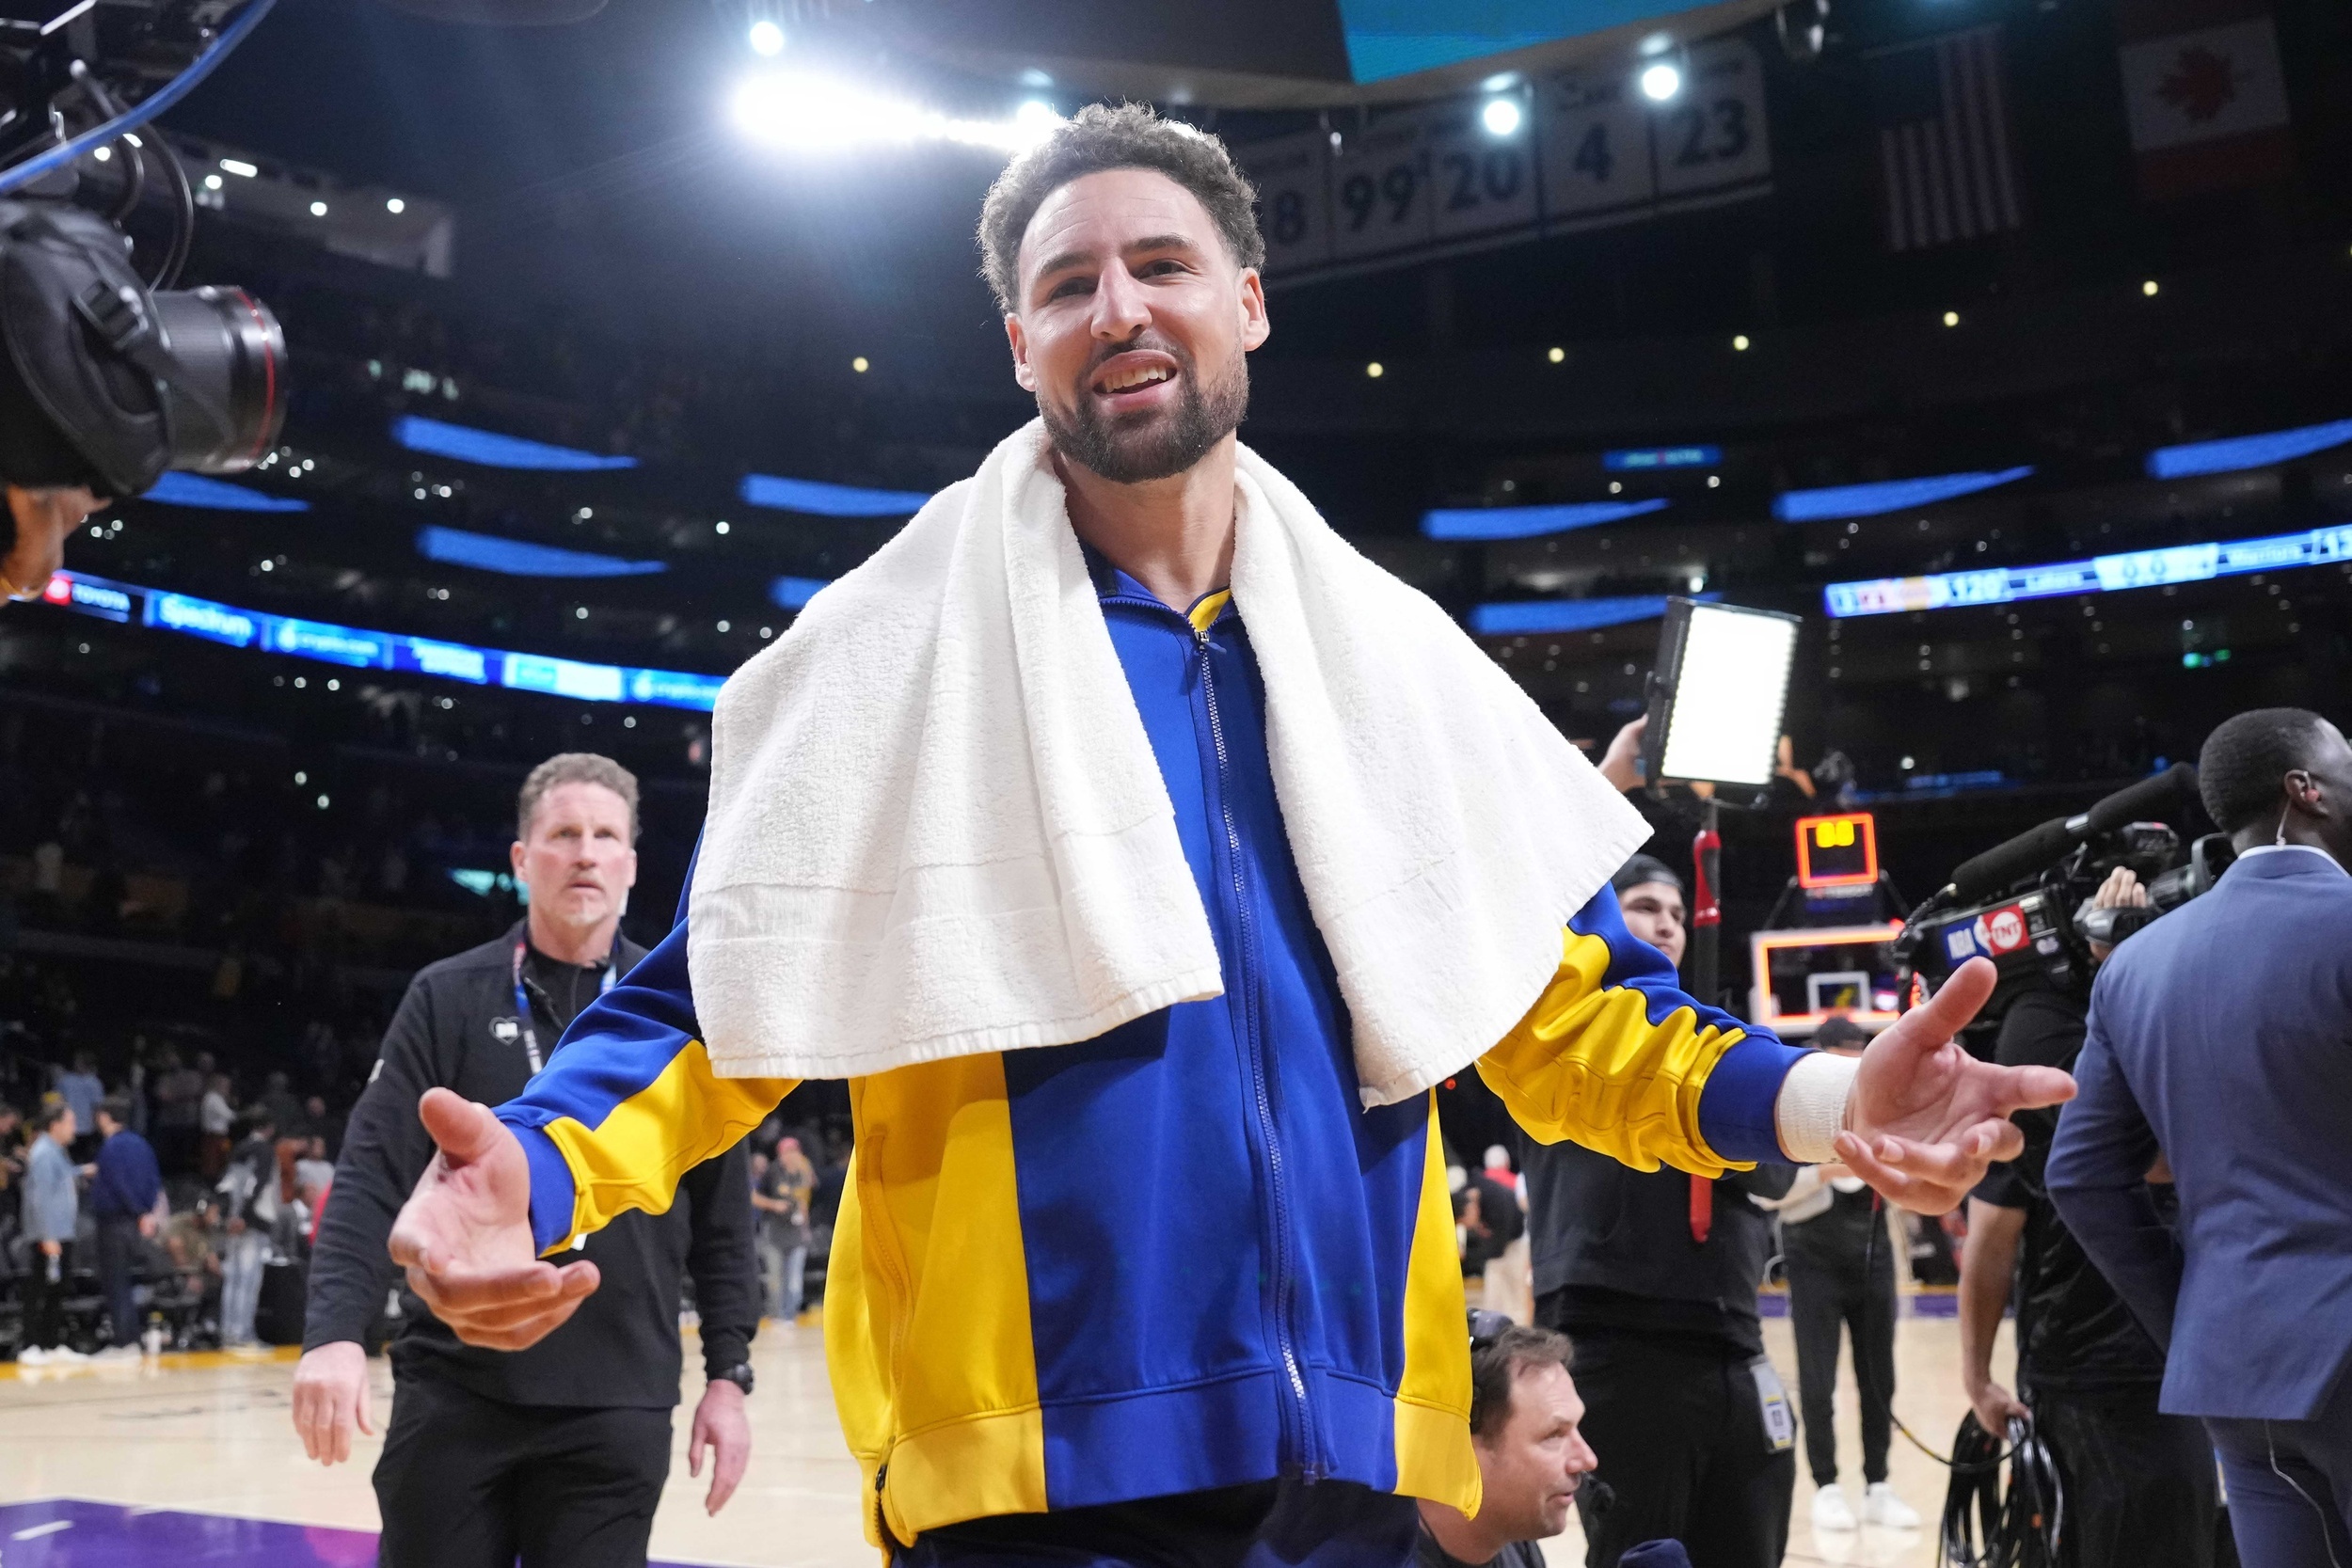 charles barkley roasts klay thompson: 'old players don't get better'